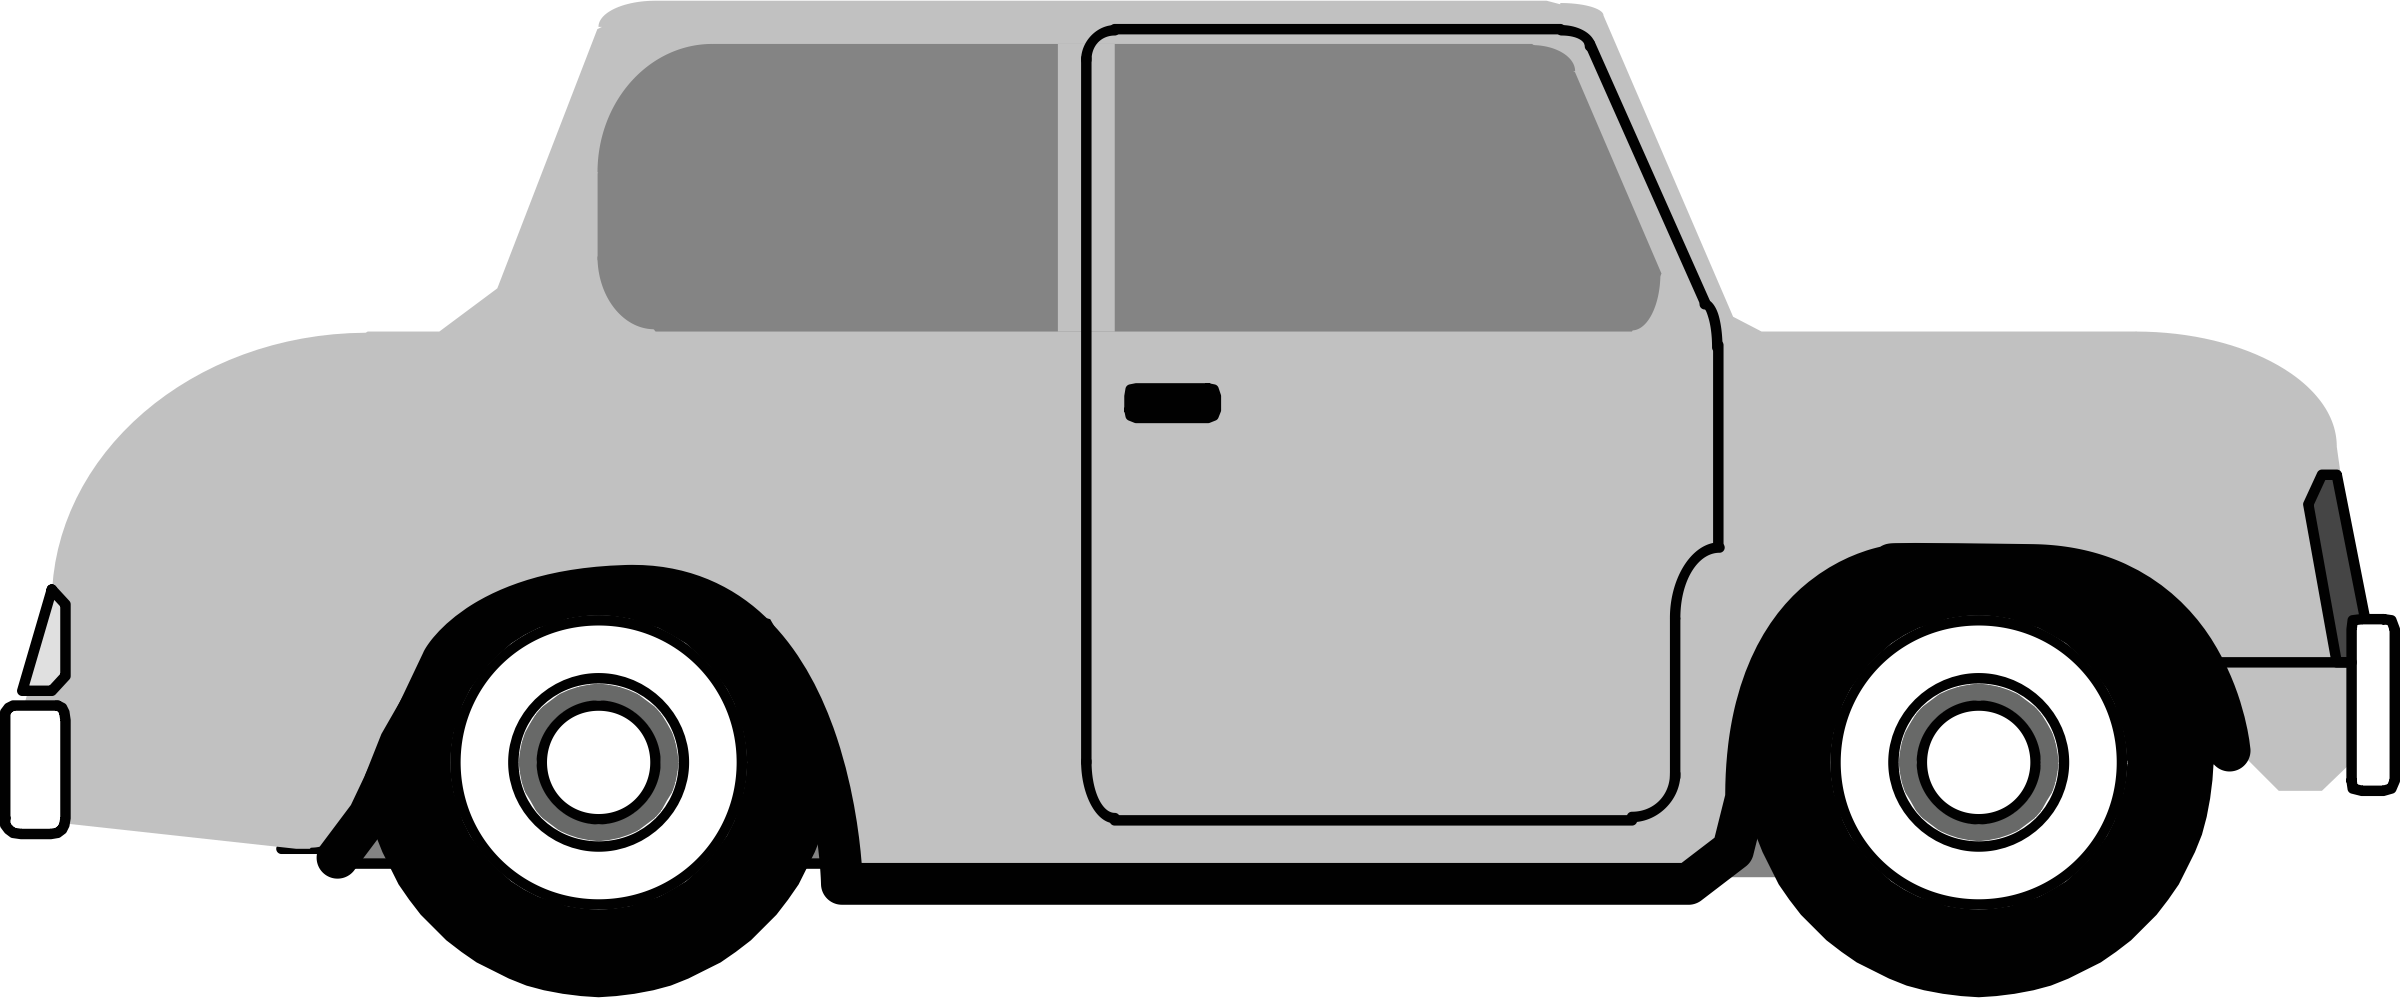 car clipart side view - photo #16